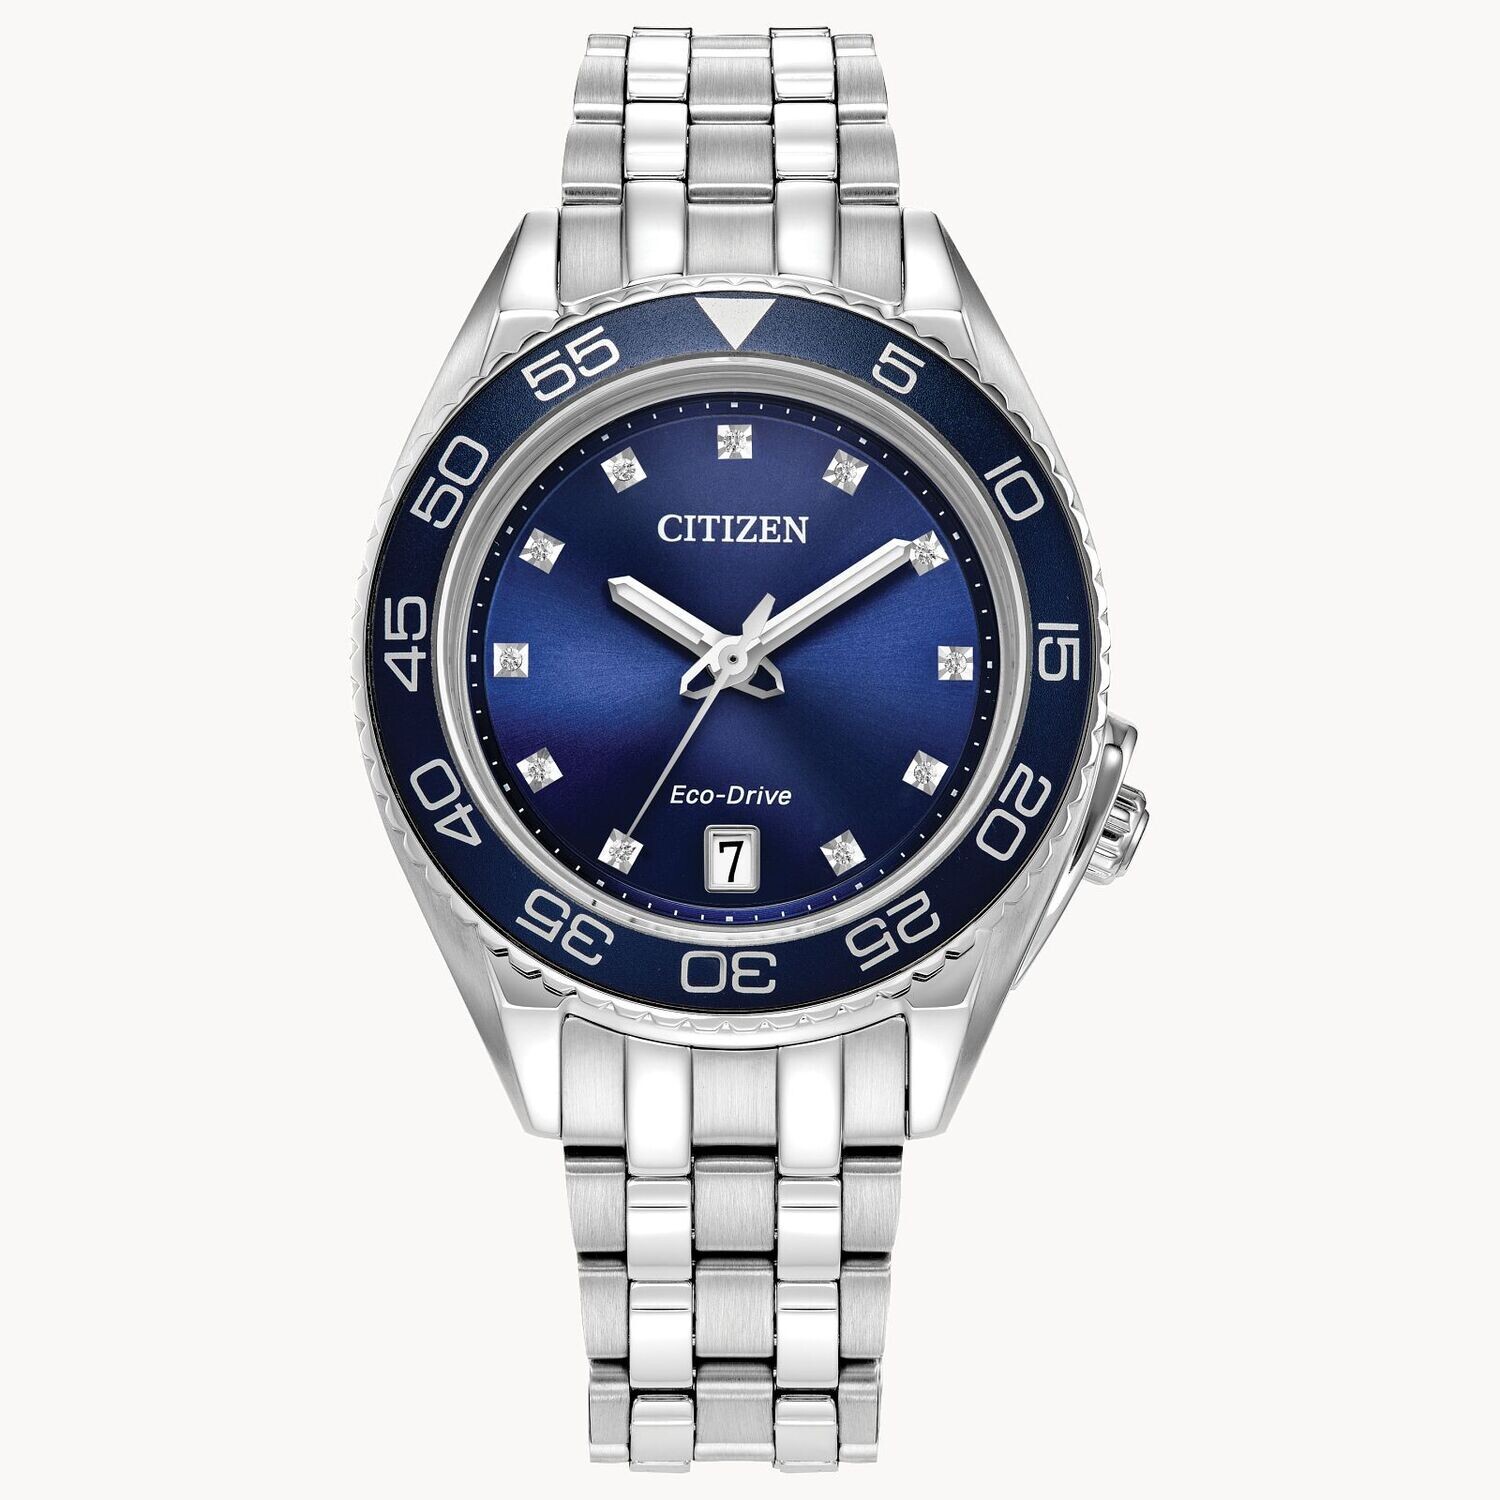 Citizen Carson Eco-drive FE6160-57L 35mm 100m WR sapphire crystal women’s watch stainless steel bracelet Eco-drive movement (solar or light powered)